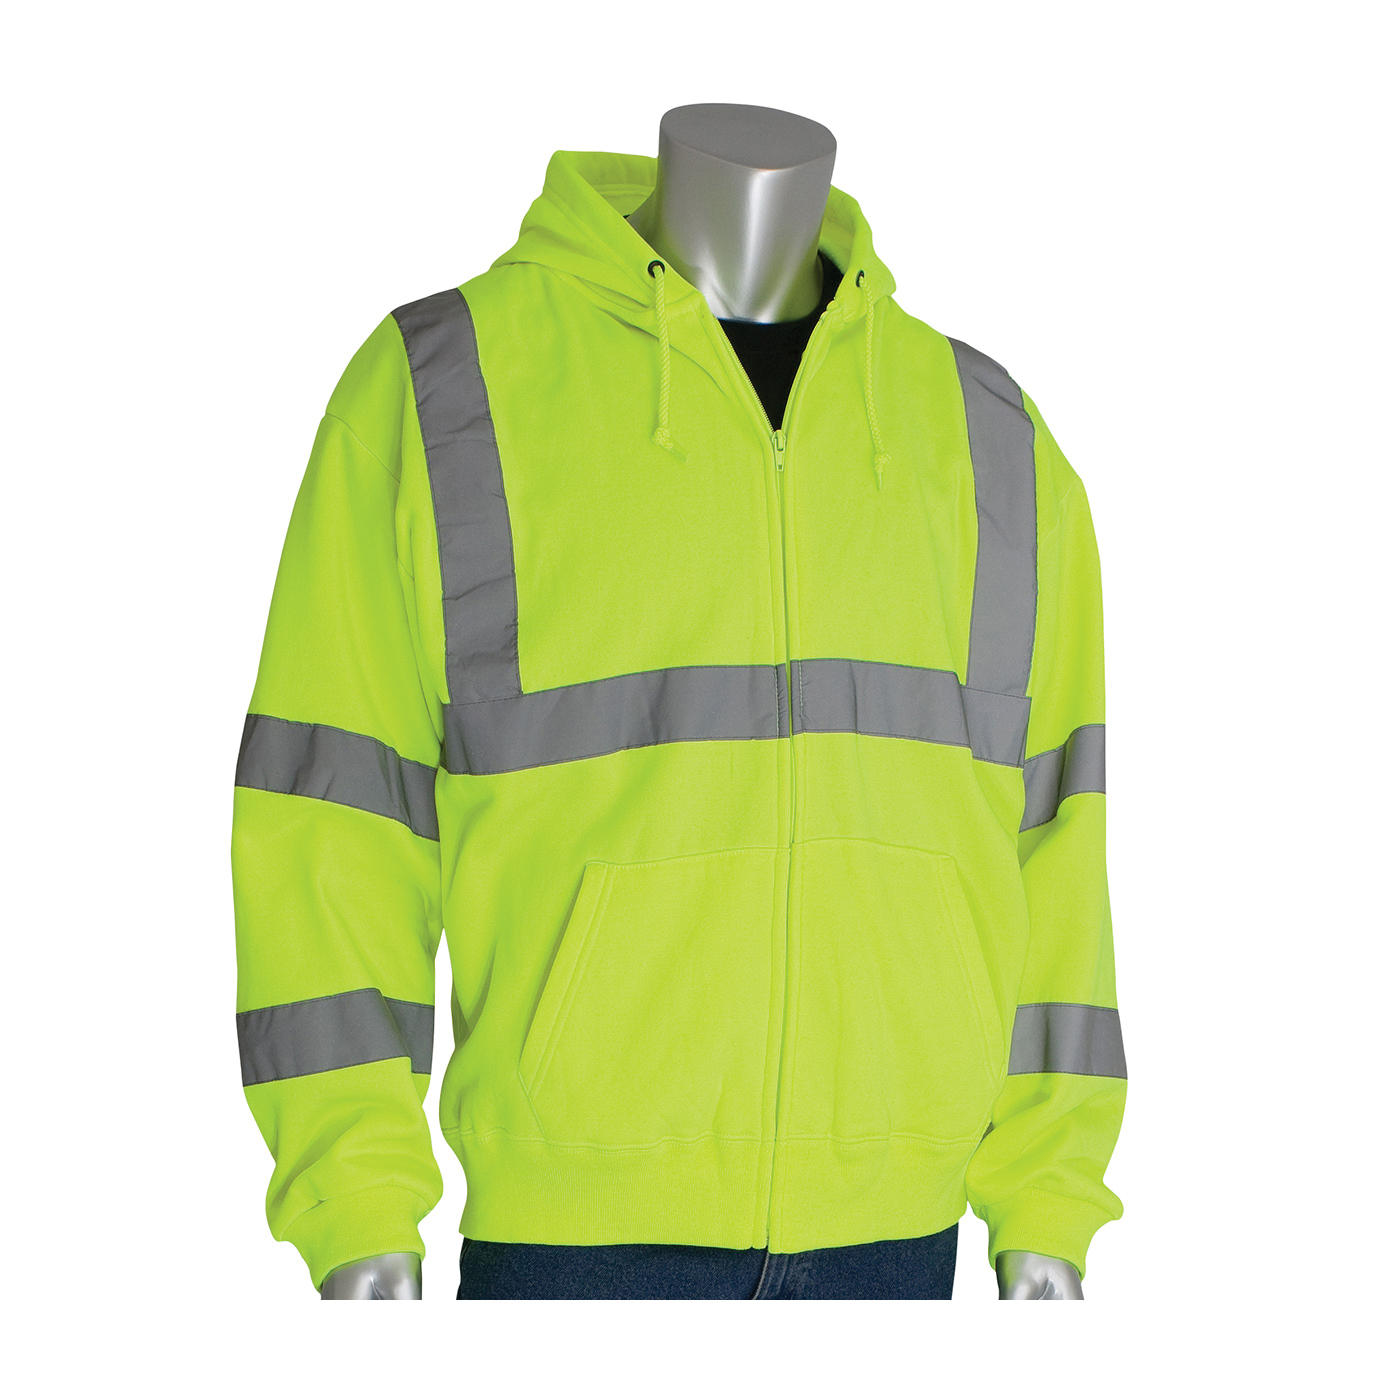 PIP® SafetyGear 323-HSSELY-XL Premium High Visibility Sweatshirt, XL, Yellow, Wicking Polyester, 28.3 in L